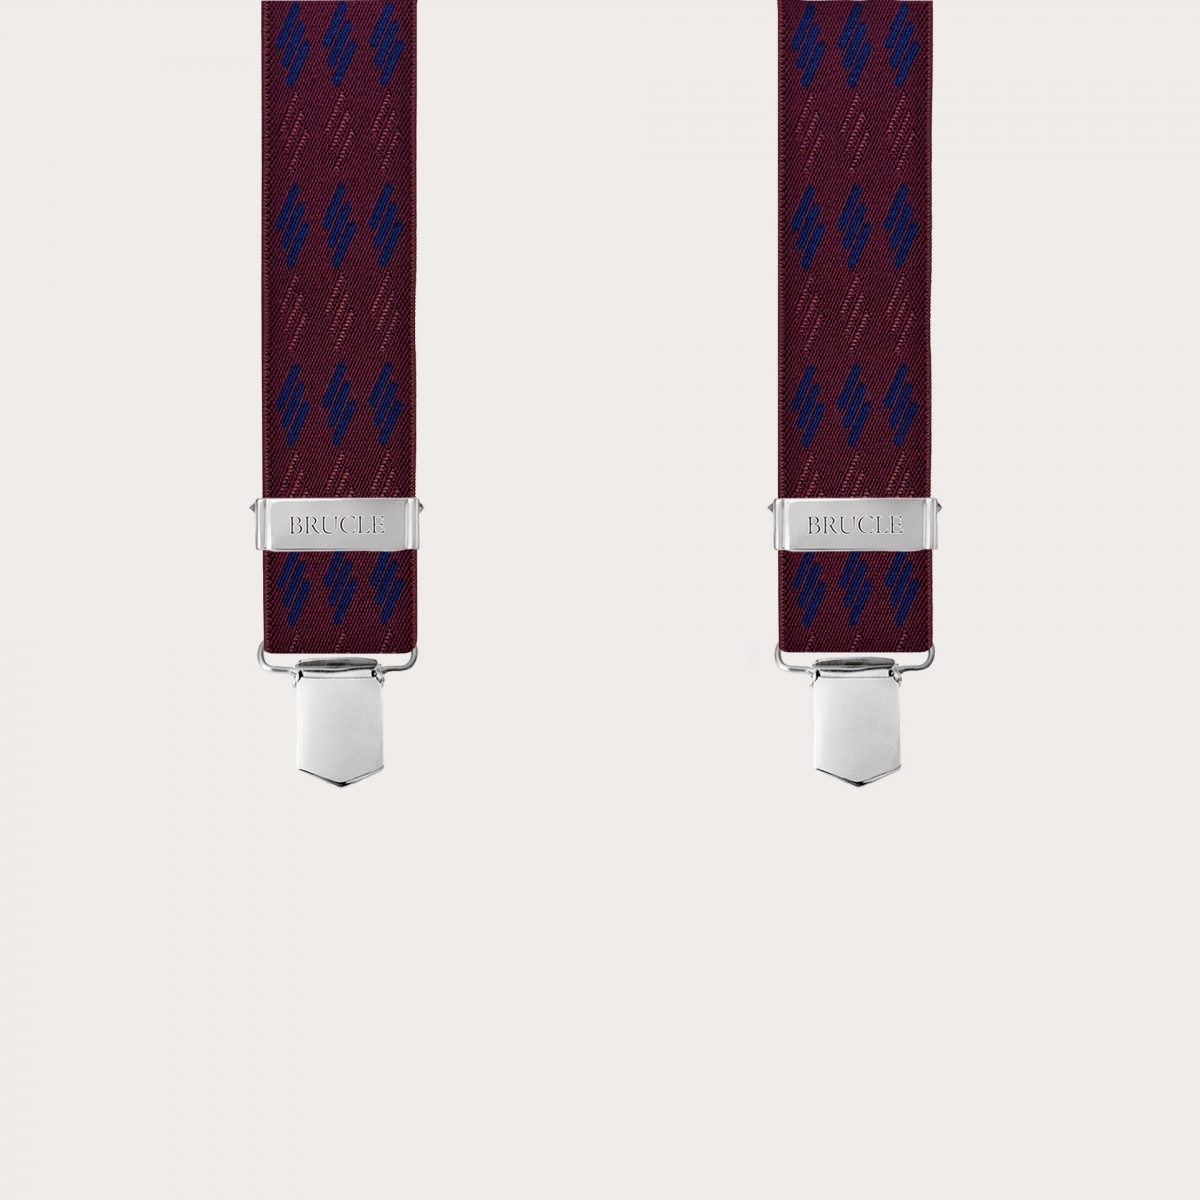 Wide unisex suspenders with burgundy and blue striped pattern